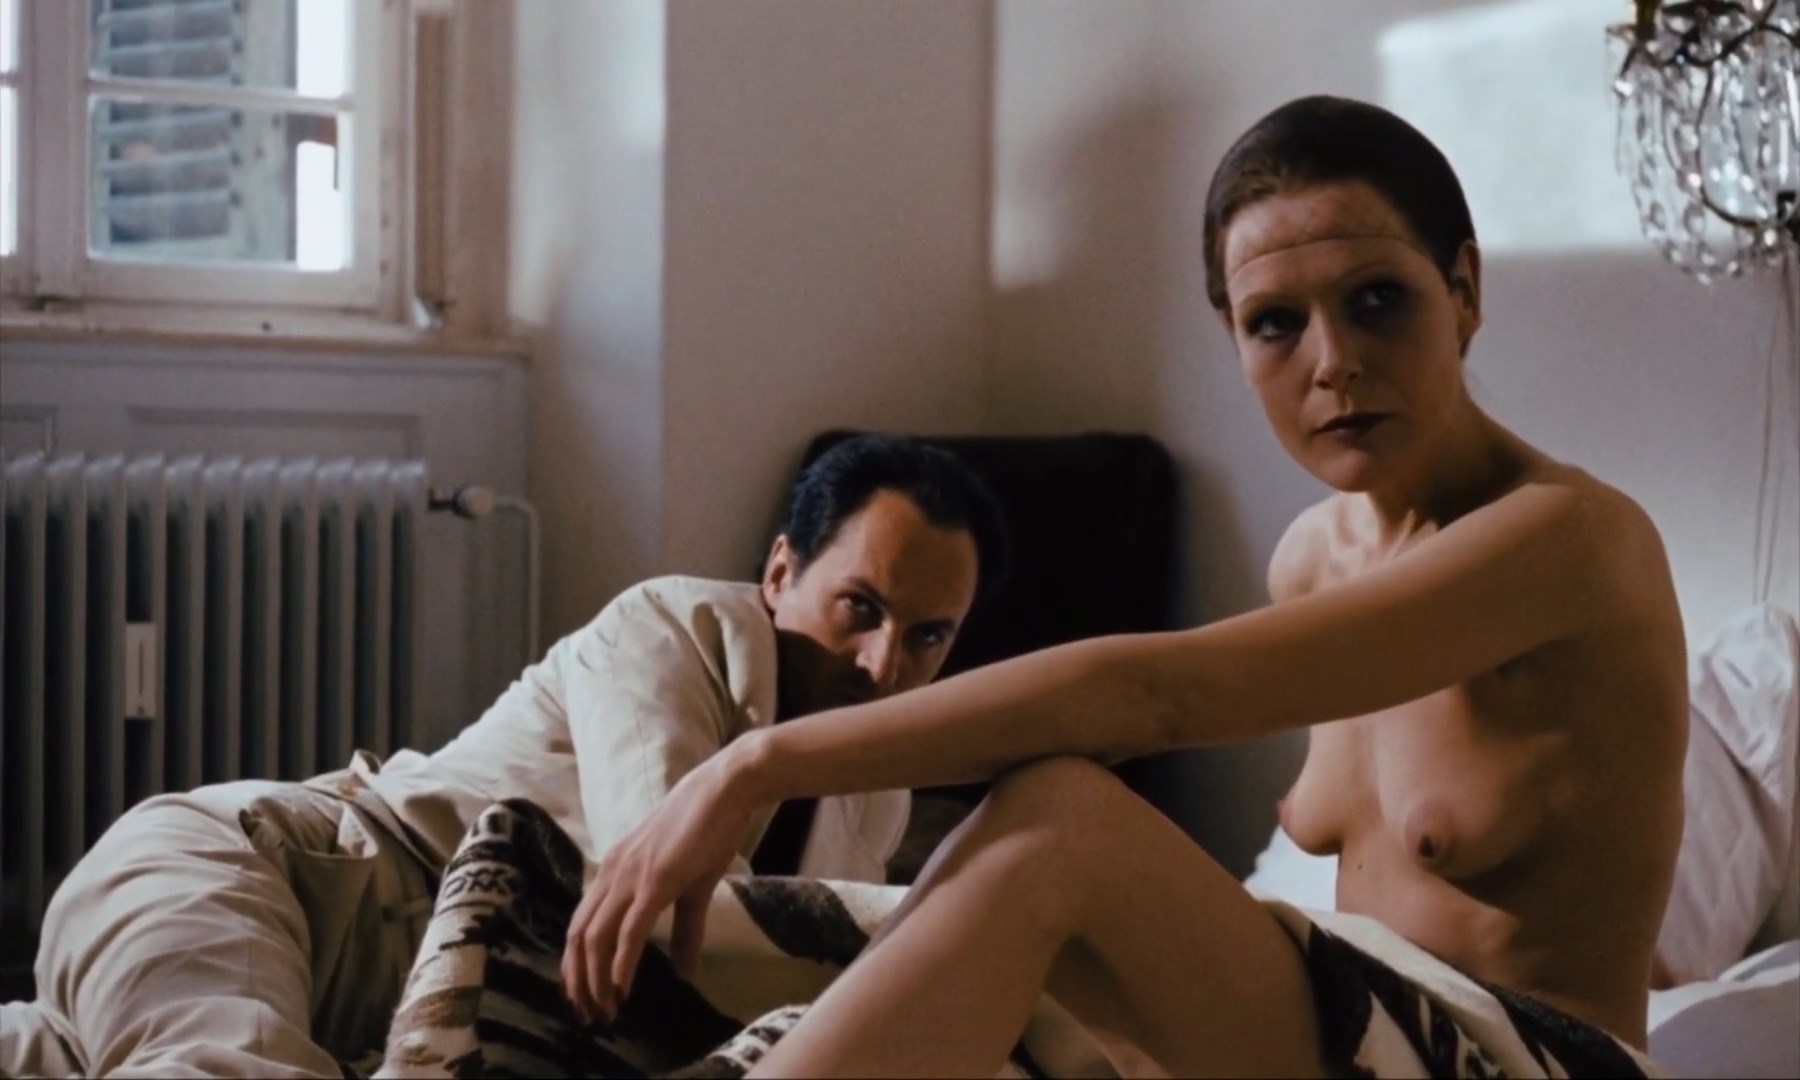 Margit Carstensen has a nude scene in the movie “Chinesisches Roulette” whi...